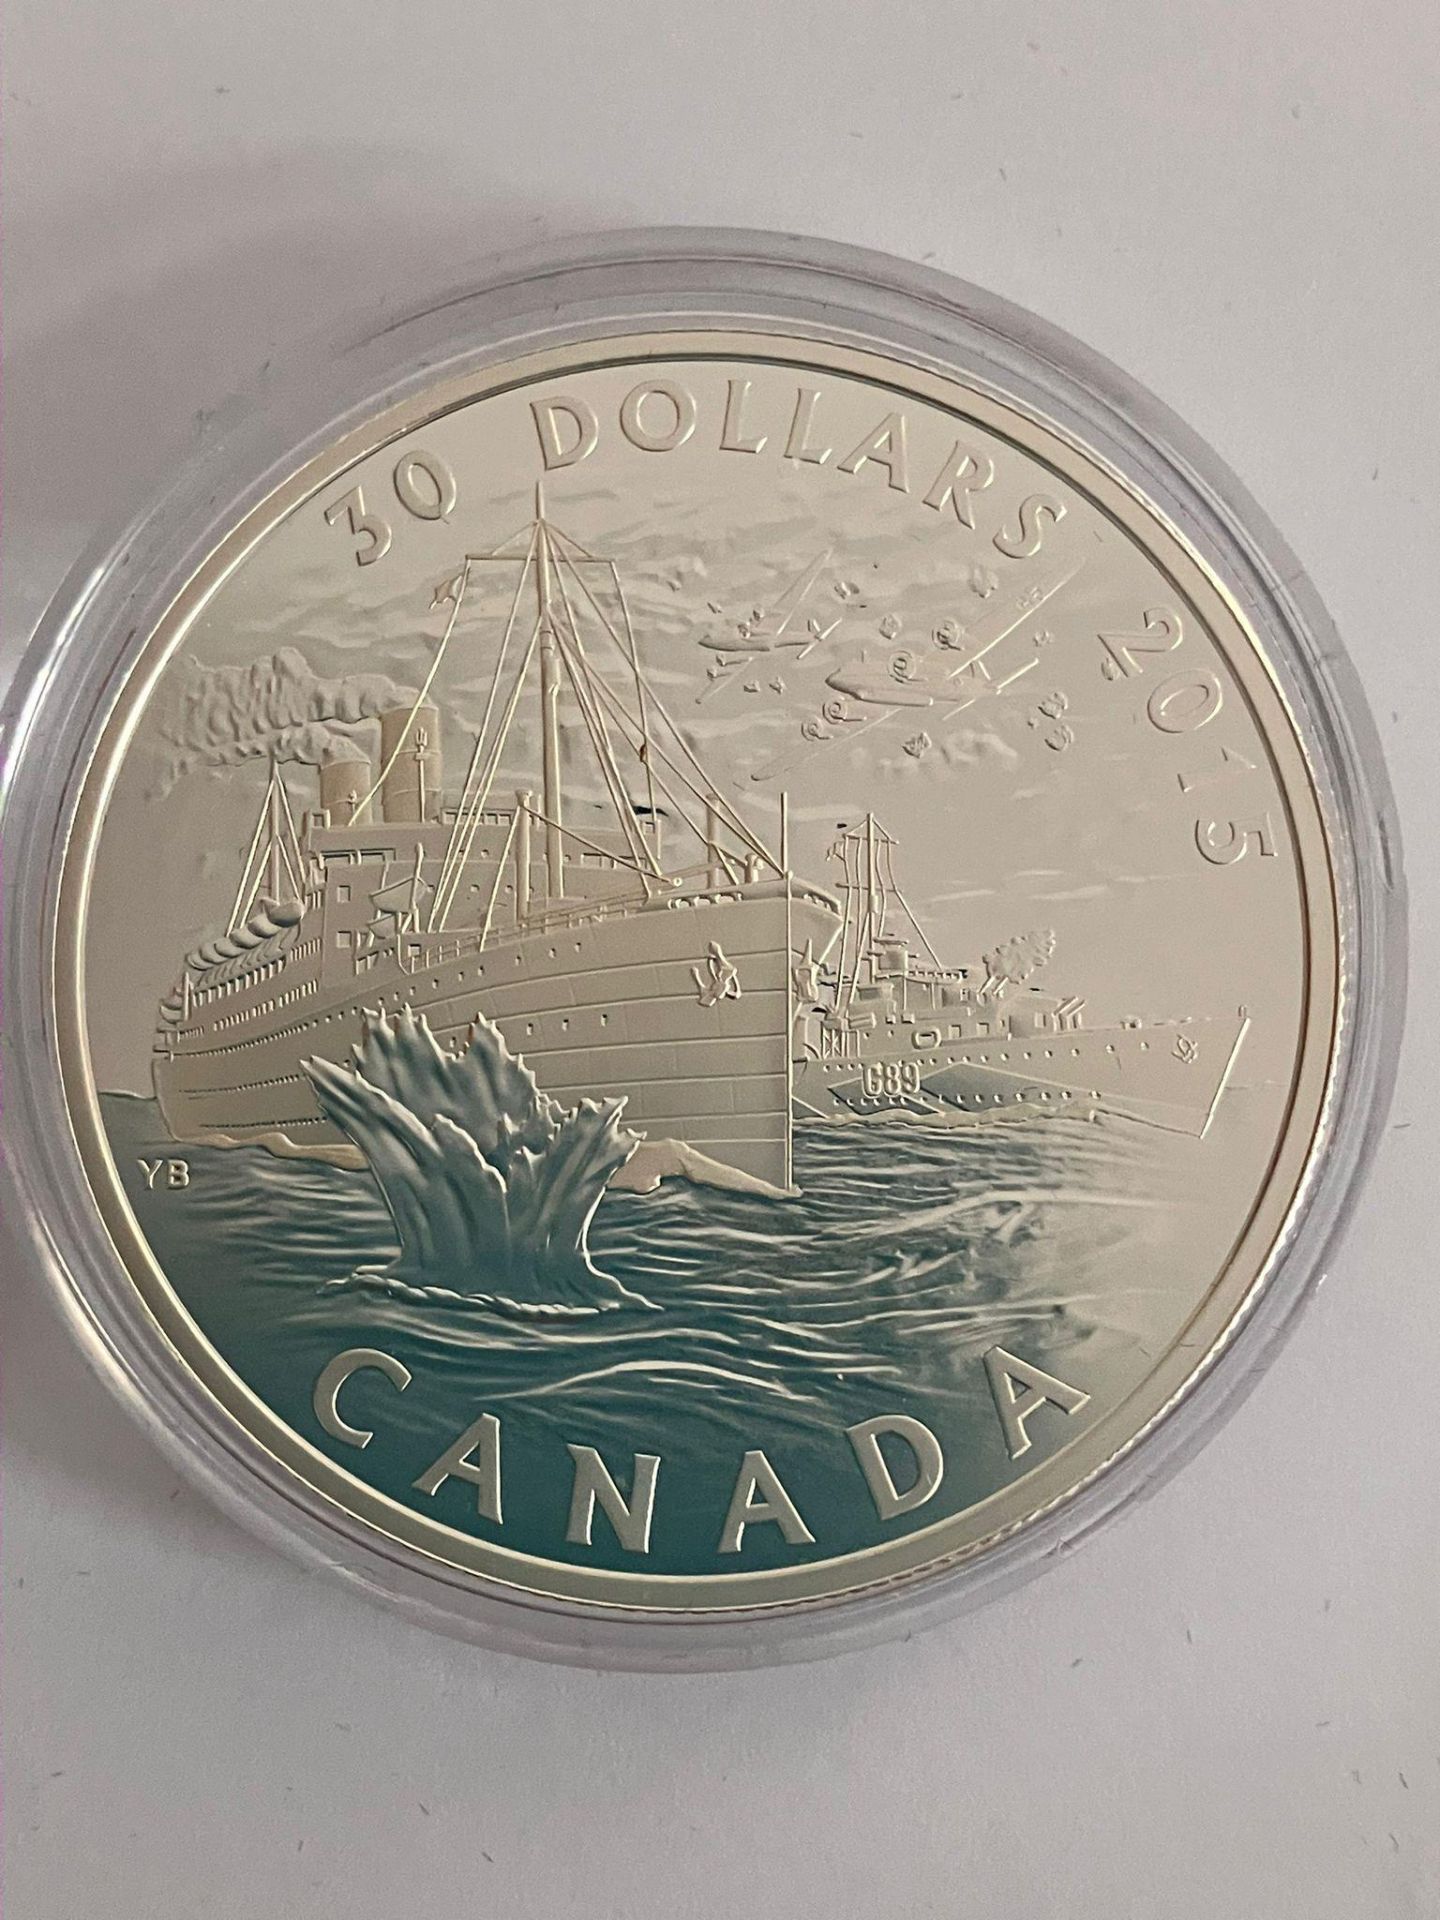 2015 CANADA 30 DOLLAR SILVER COIN. Commemorating the Battle of the Atlantic. Issued by the - Image 5 of 5